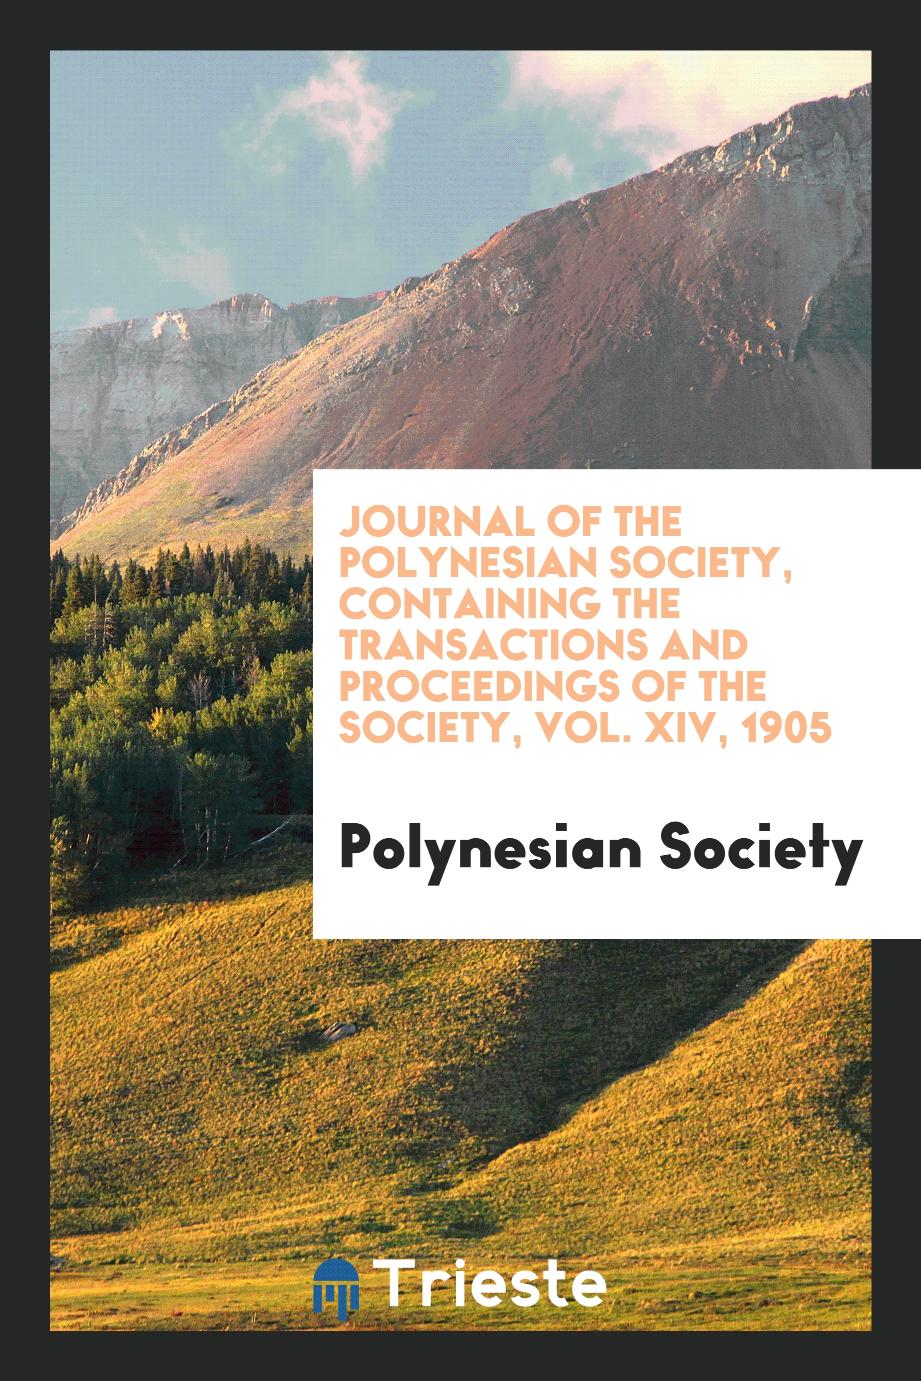 Journal of the Polynesian Society, Containing the Transactions and Proceedings of the Society, Vol. XIV, 1905